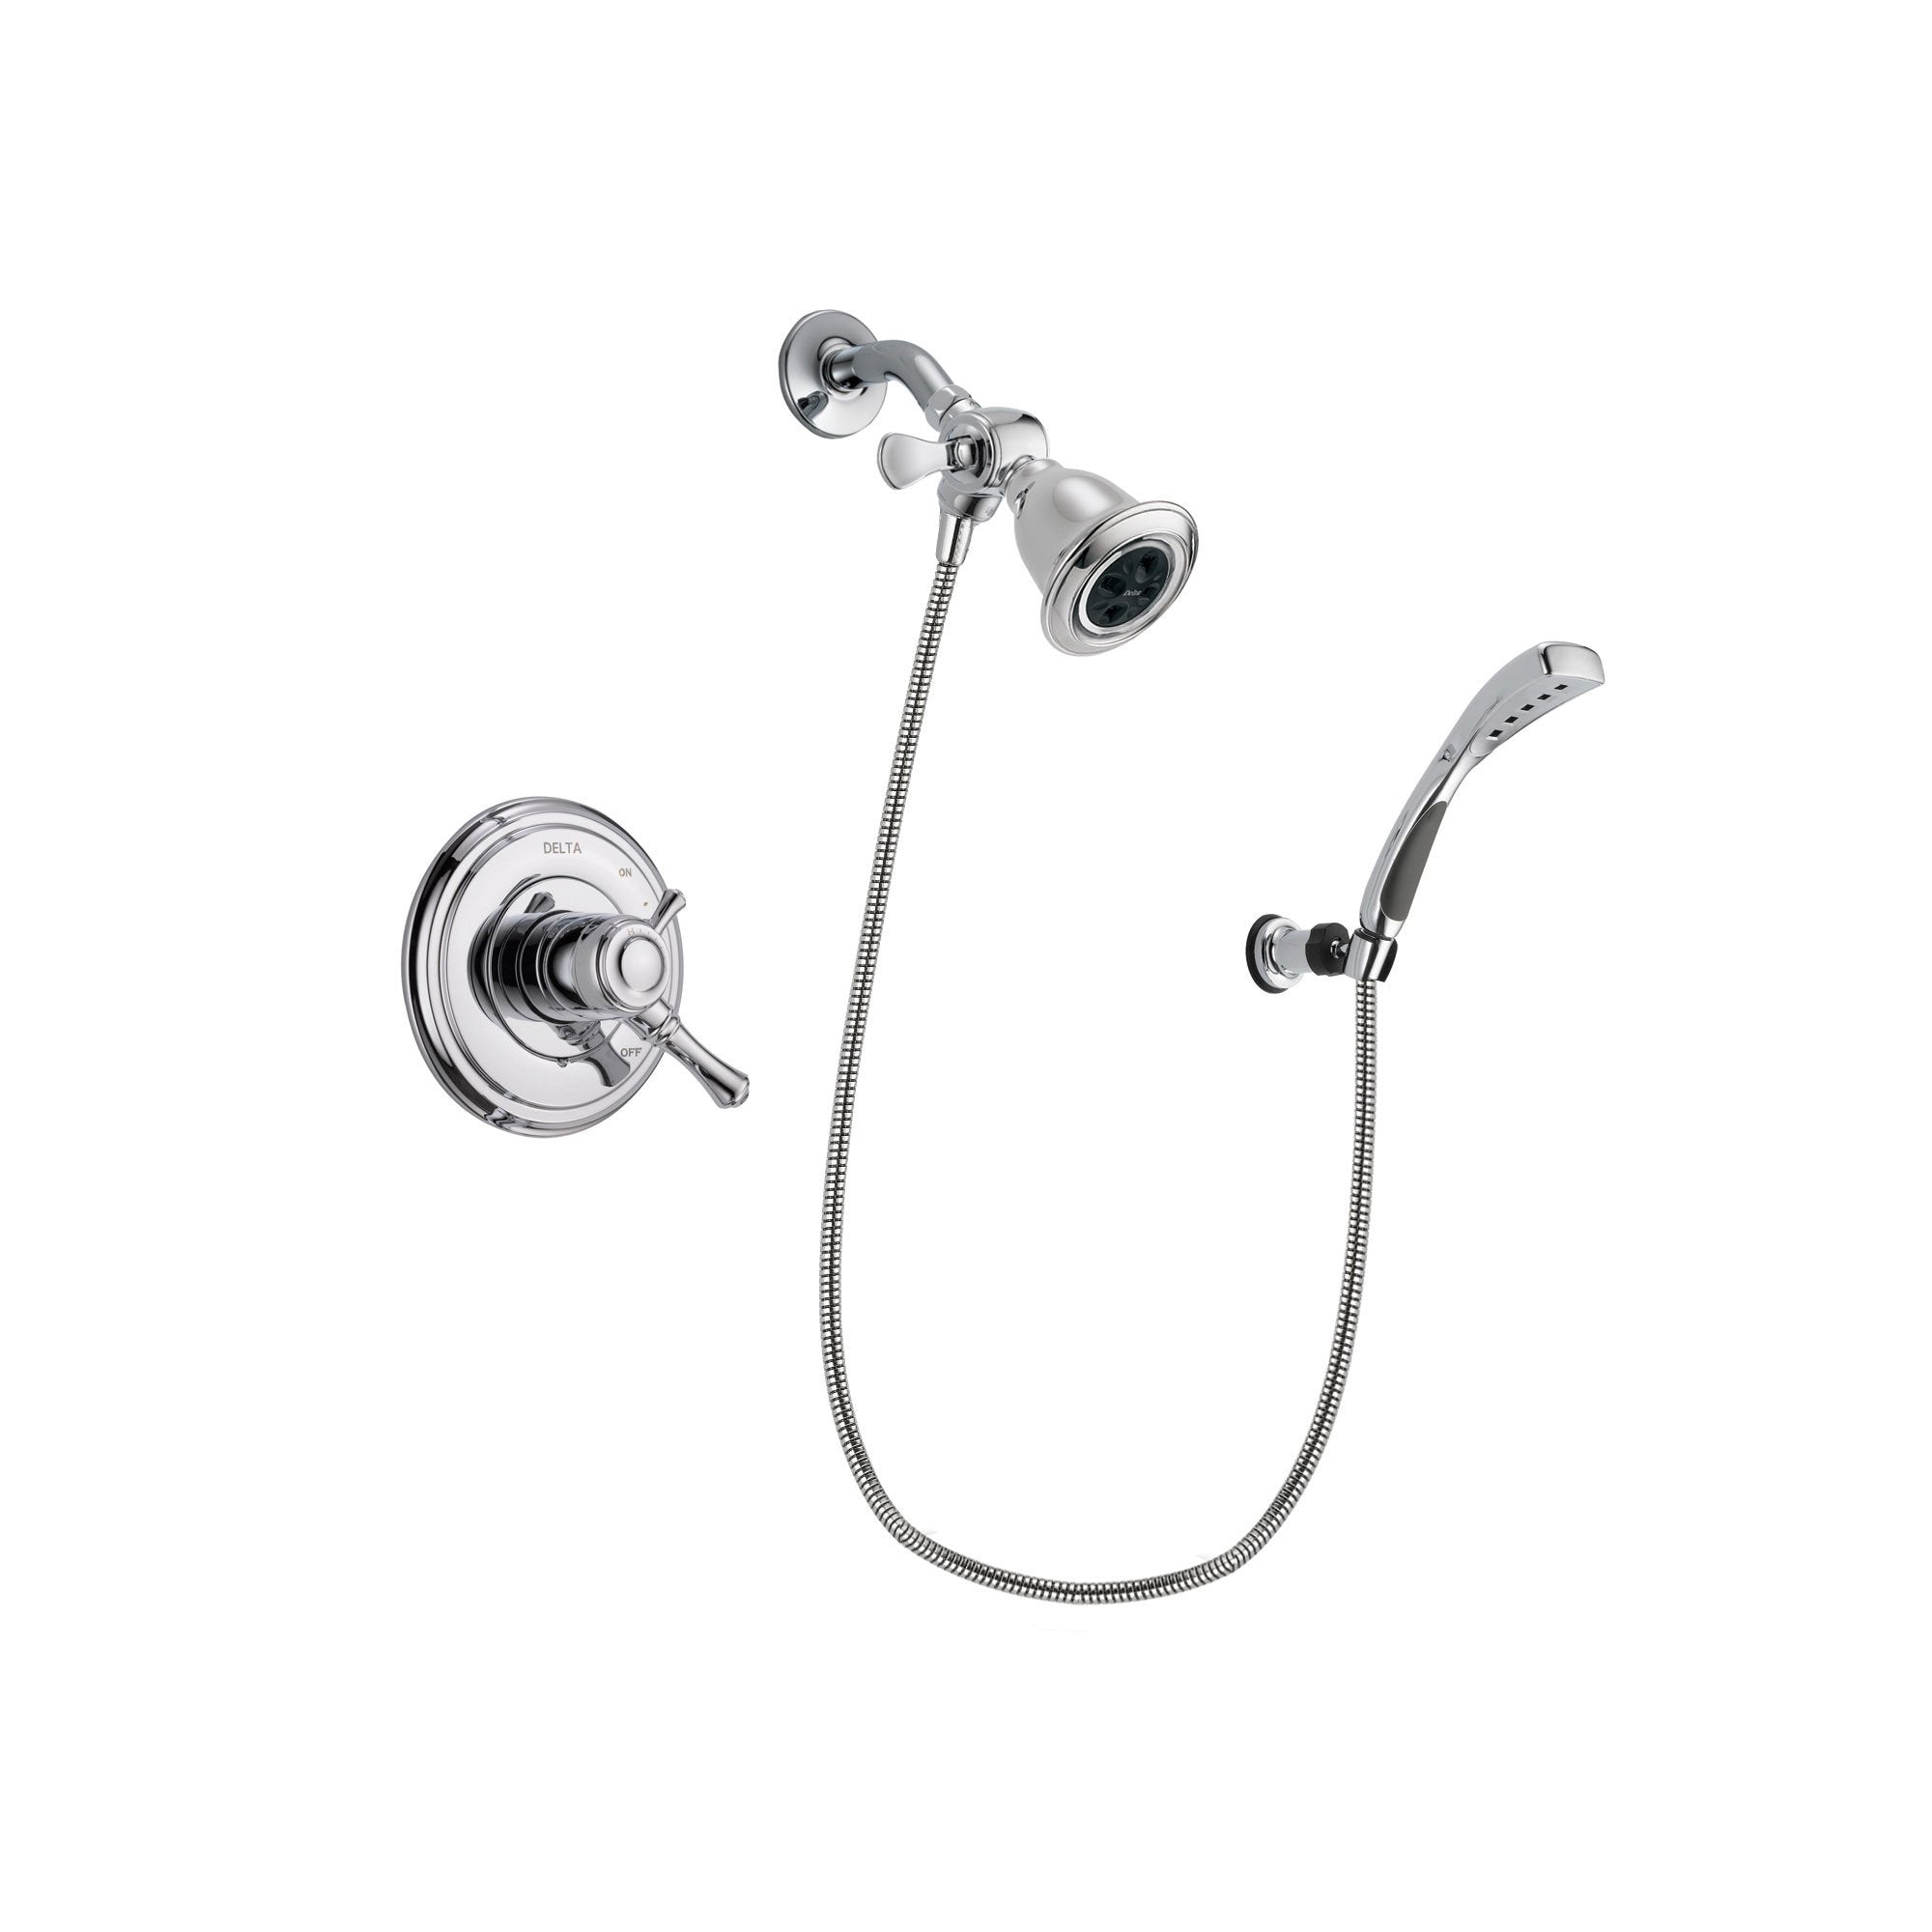 Delta Cassidy Chrome Finish Dual Control Shower Faucet System Package with Water Efficient Showerhead and Wall-Mount Bracket with Handheld Shower Spray Includes Rough-in Valve DSP1036V